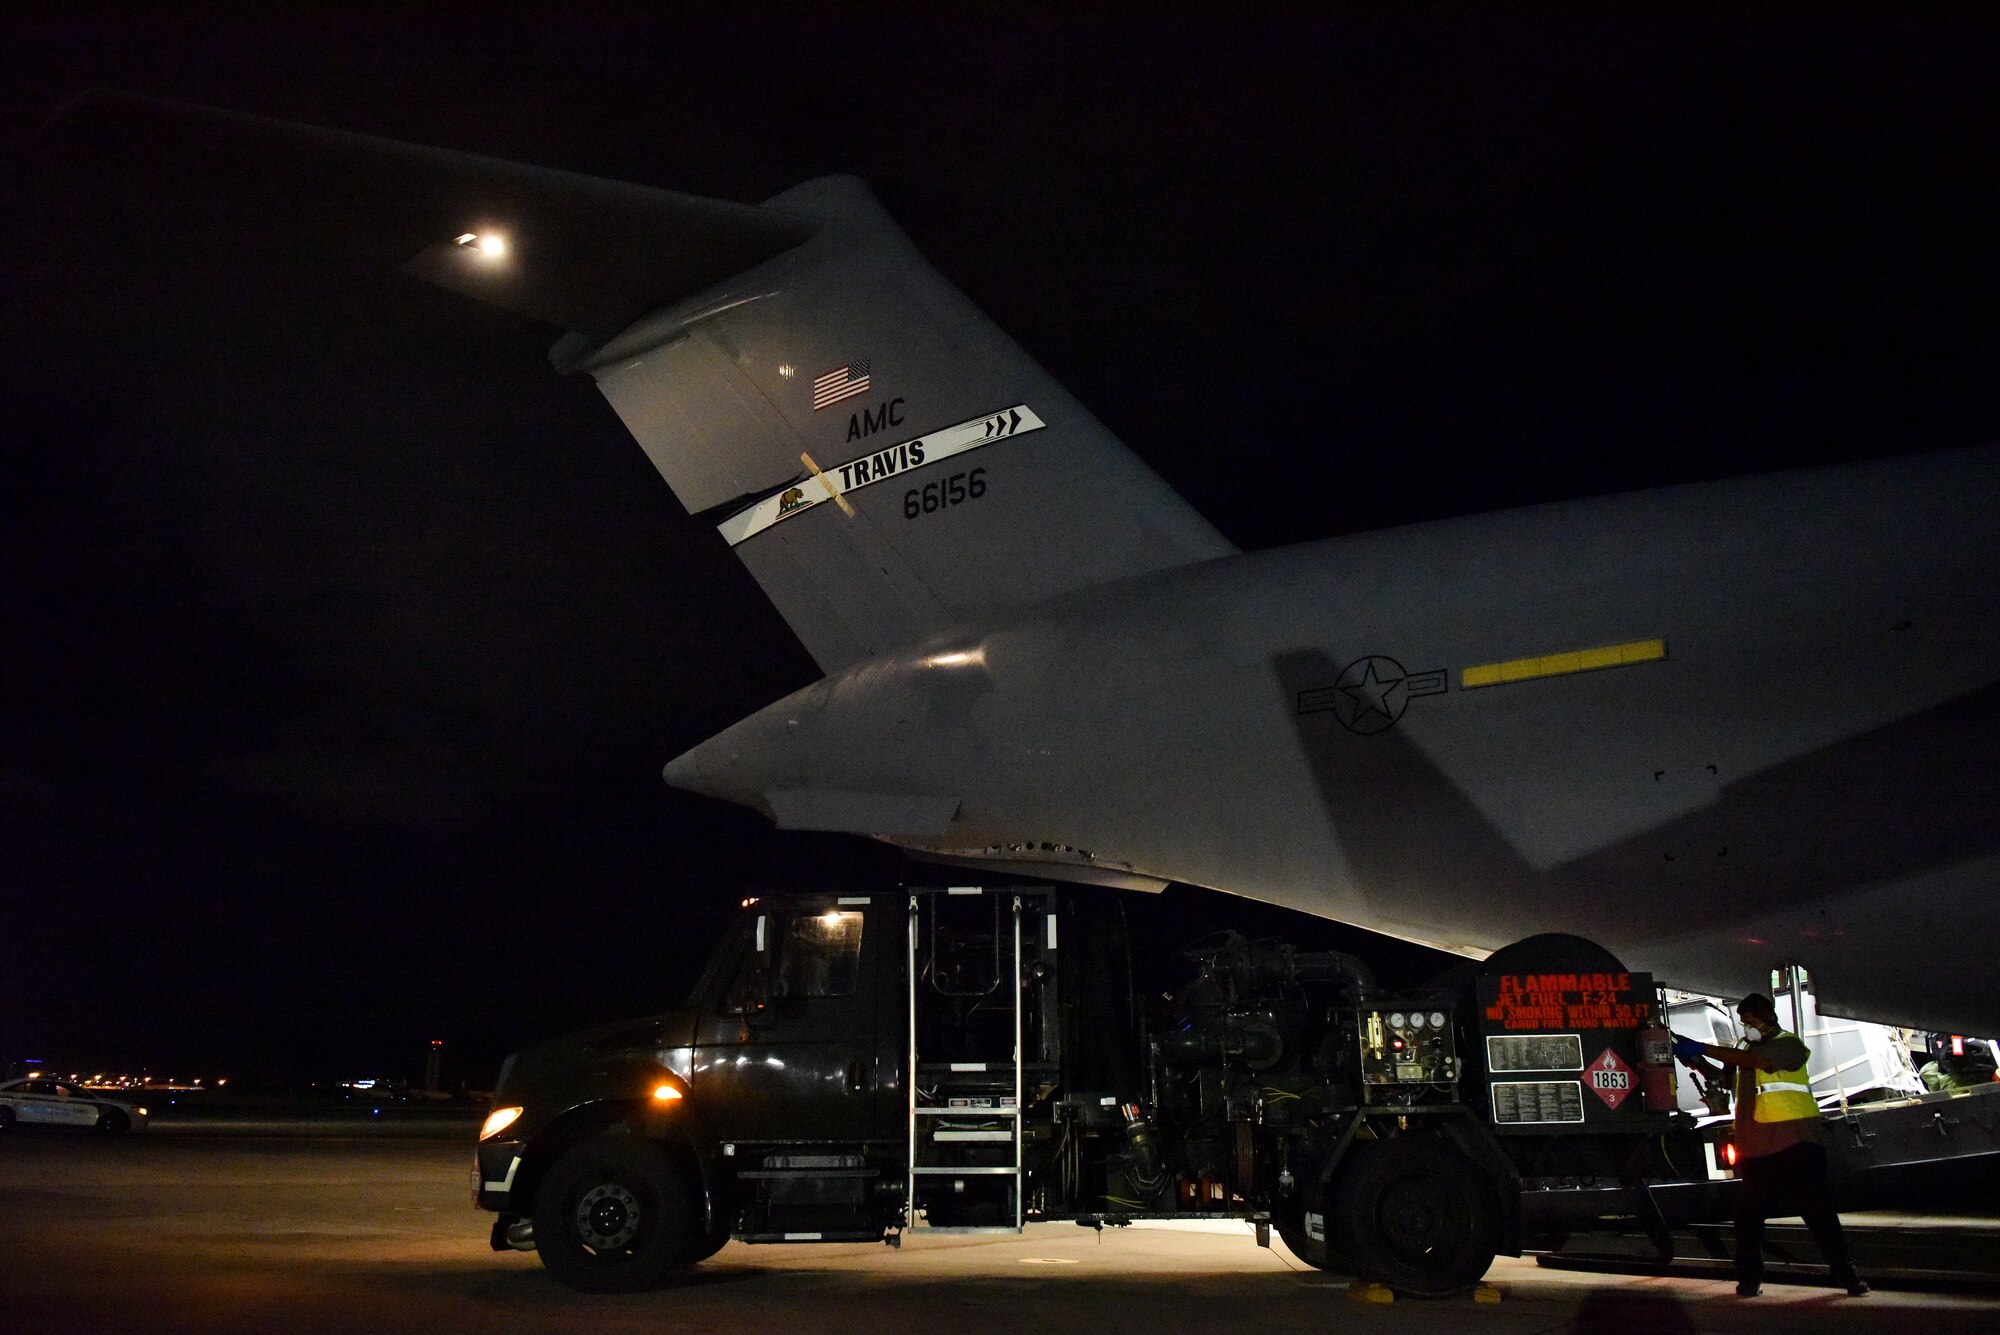 A 60th Air Mobility Wing C-17 from Travis Air Force Base, California, receives fuel on the Hickam Field flight line July 17, 2020, at Joint Base Pearl Harbor-Hickam, Hawaii. A team of Airmen from several commands rapidly executed a Transport Isolation System in support of a COVID-19 bio-containment aeromedical evacuation mission. This is the first time the TIS was utilized in the Indo-Pacific area of operations. The TIS is an infectious disease containment unit designed to minimize contamination risk to aircrew and medical attendants, while allowing in-flight medical care for patients afflicted by a disease. (U.S. Air Force photo by Tech. Sgt. Anthony Nelson Jr.)